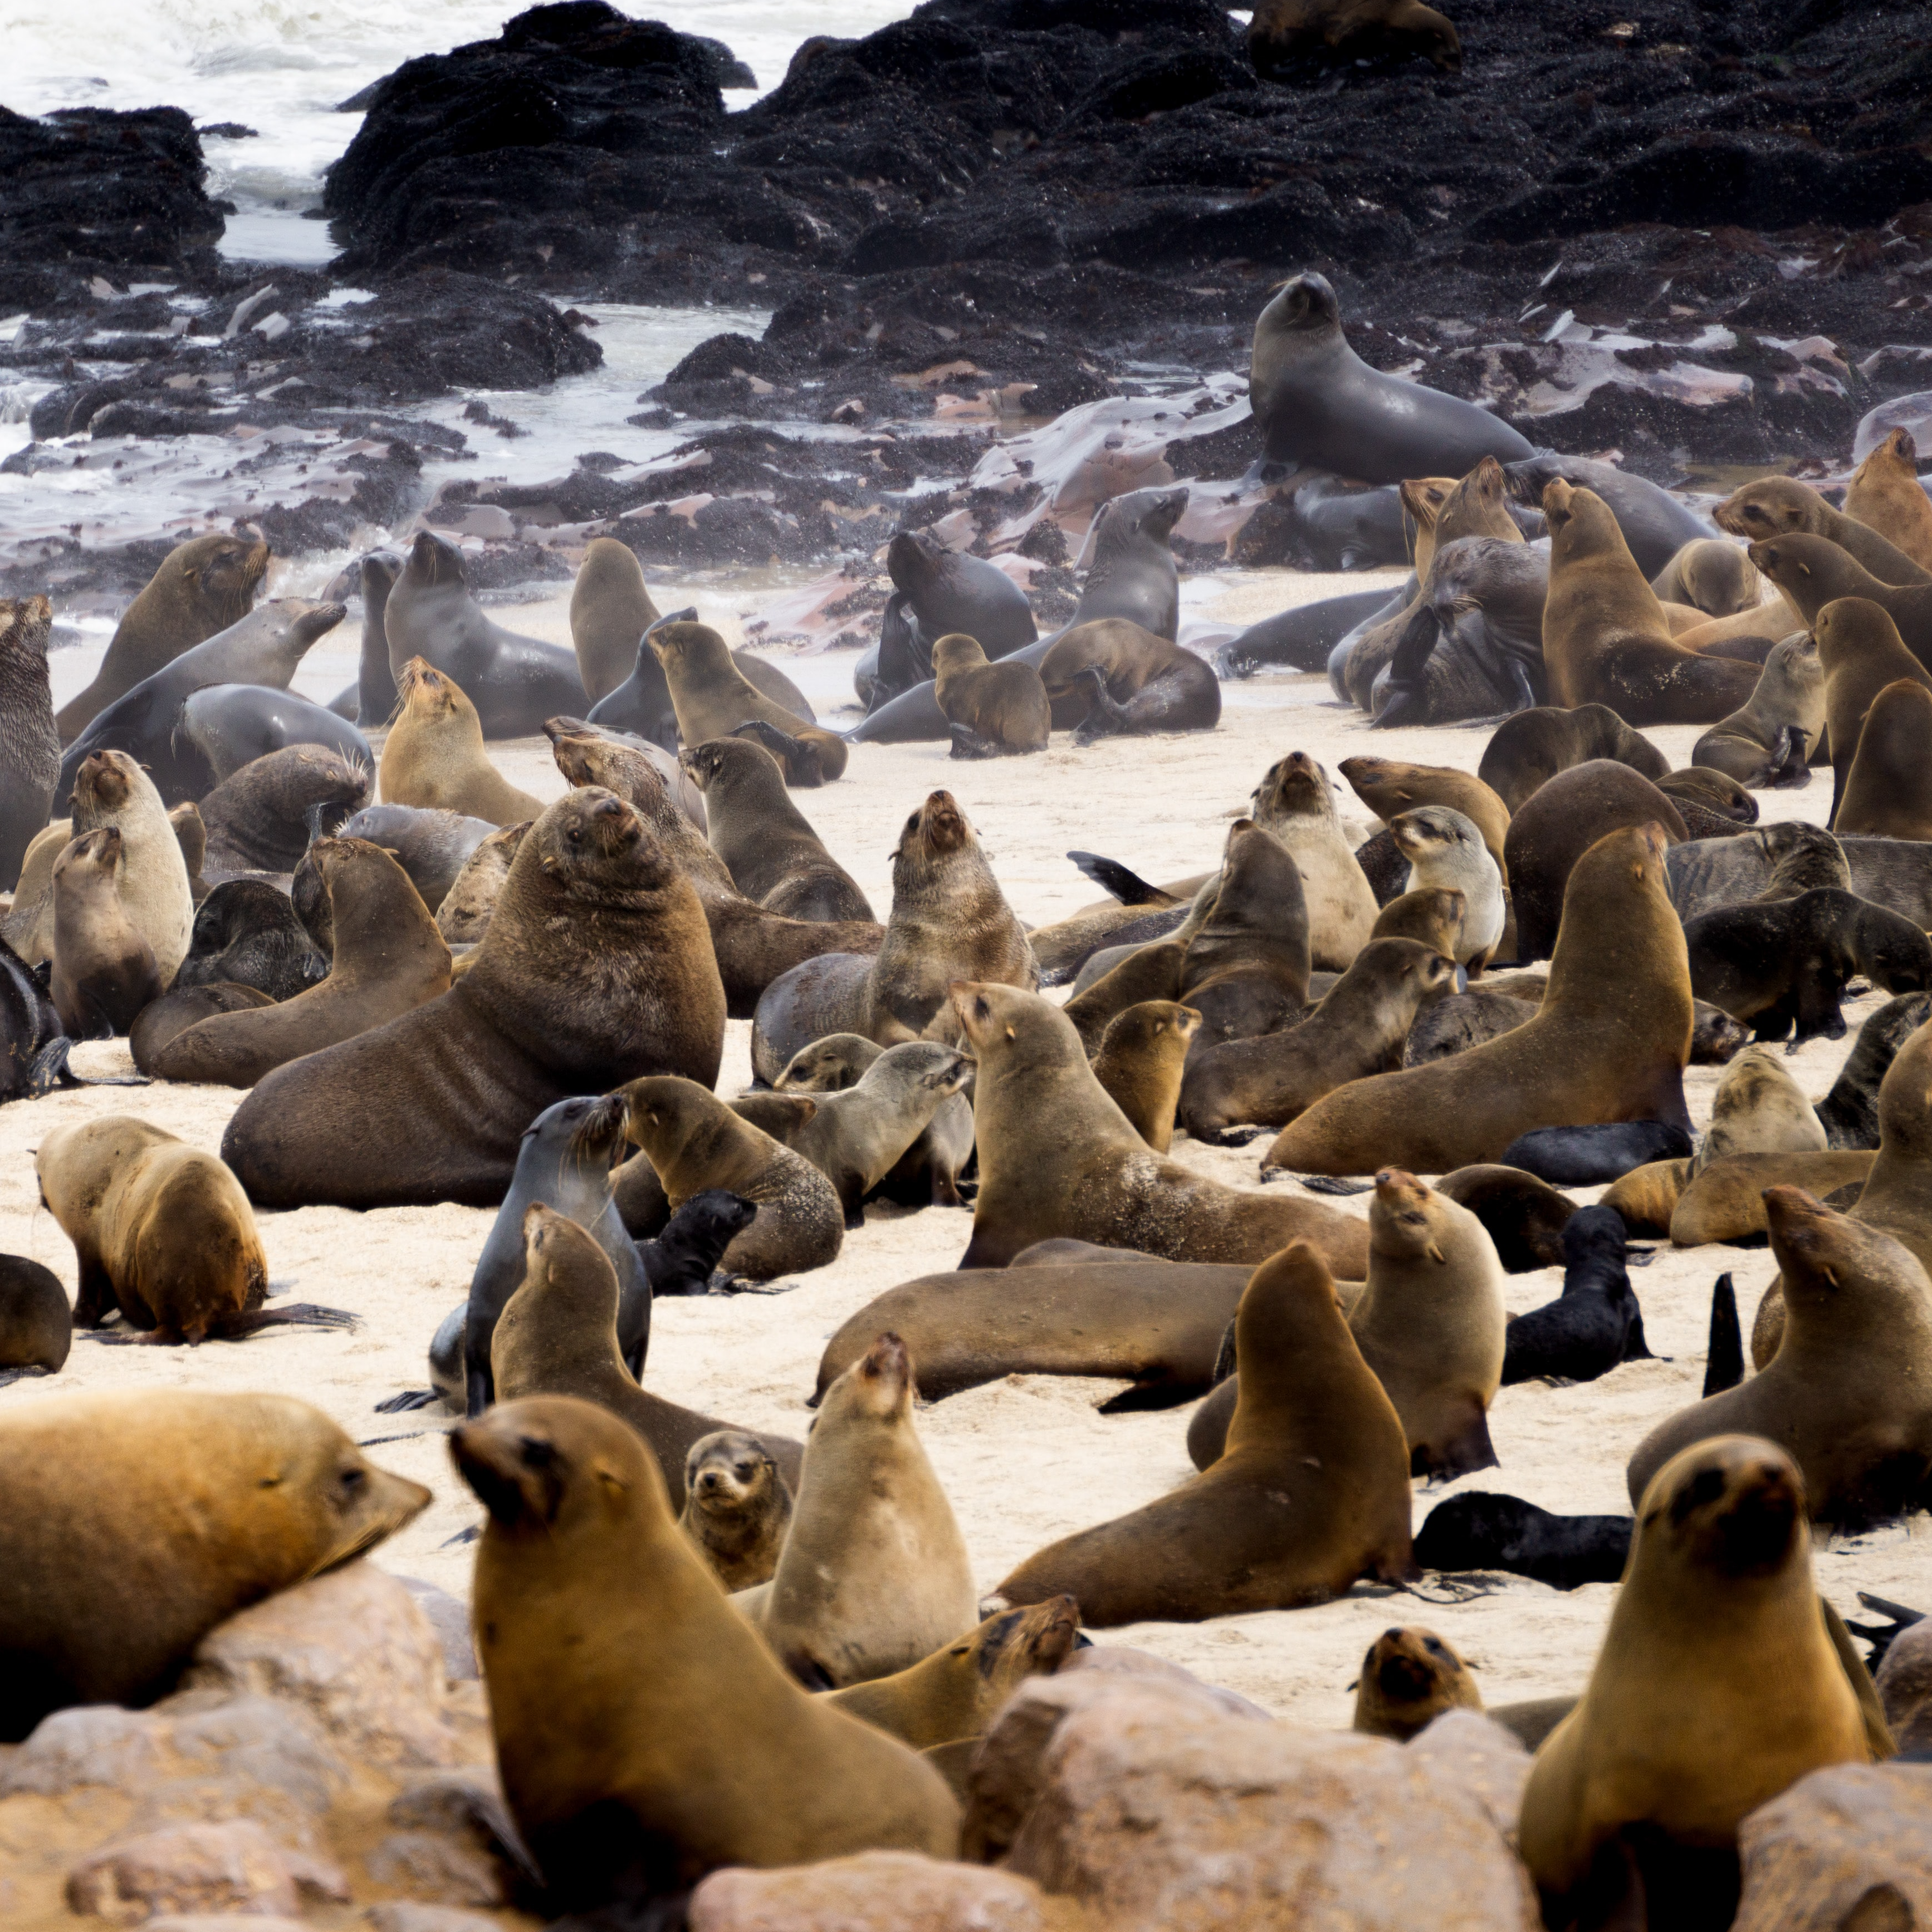 A large group of seals on the beach.